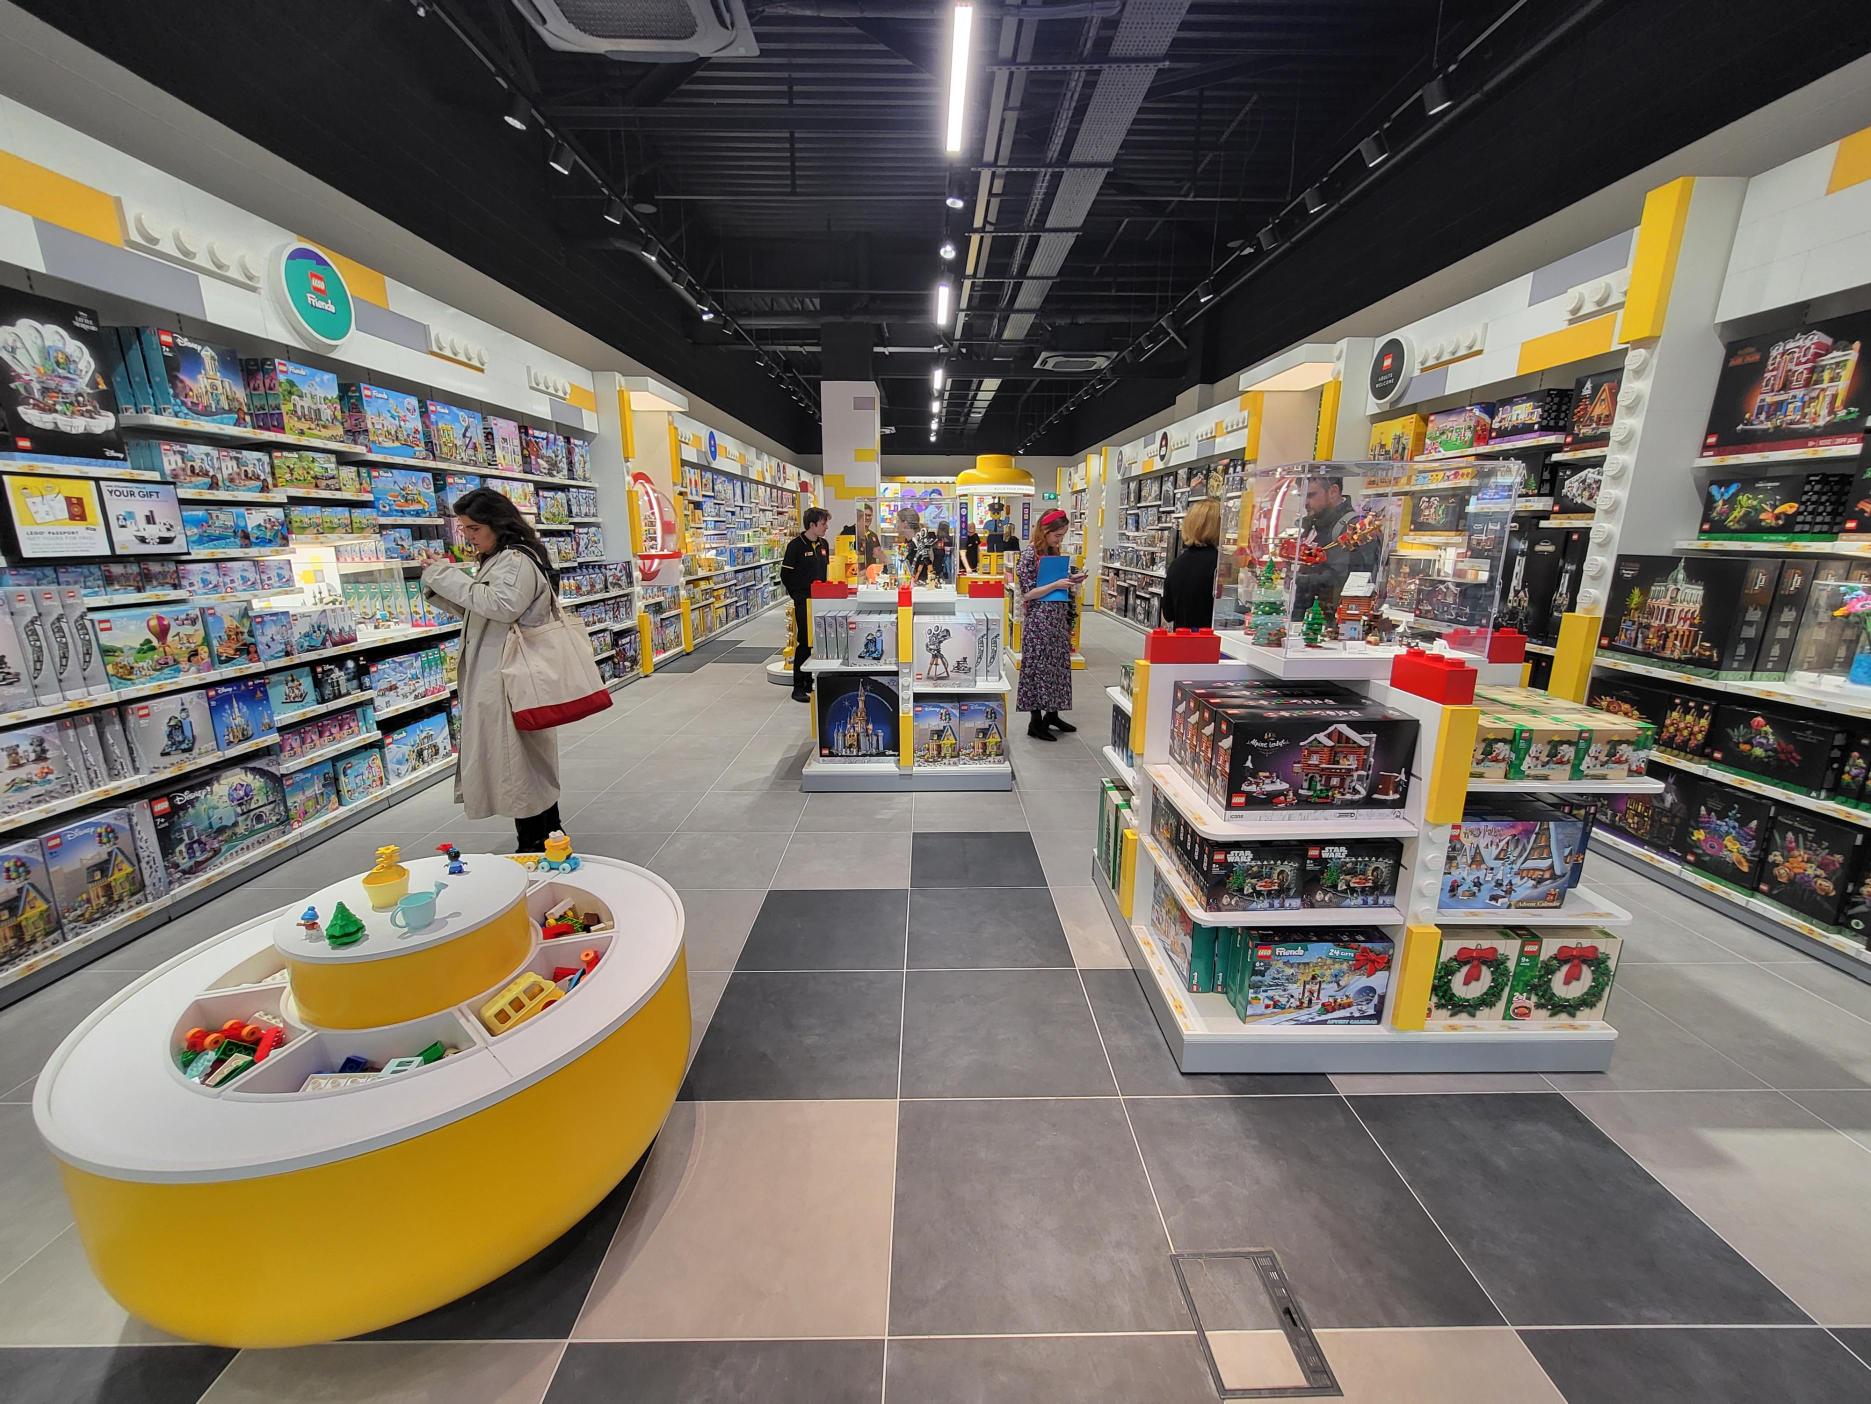 The new LEGO store in Blanchardstown.